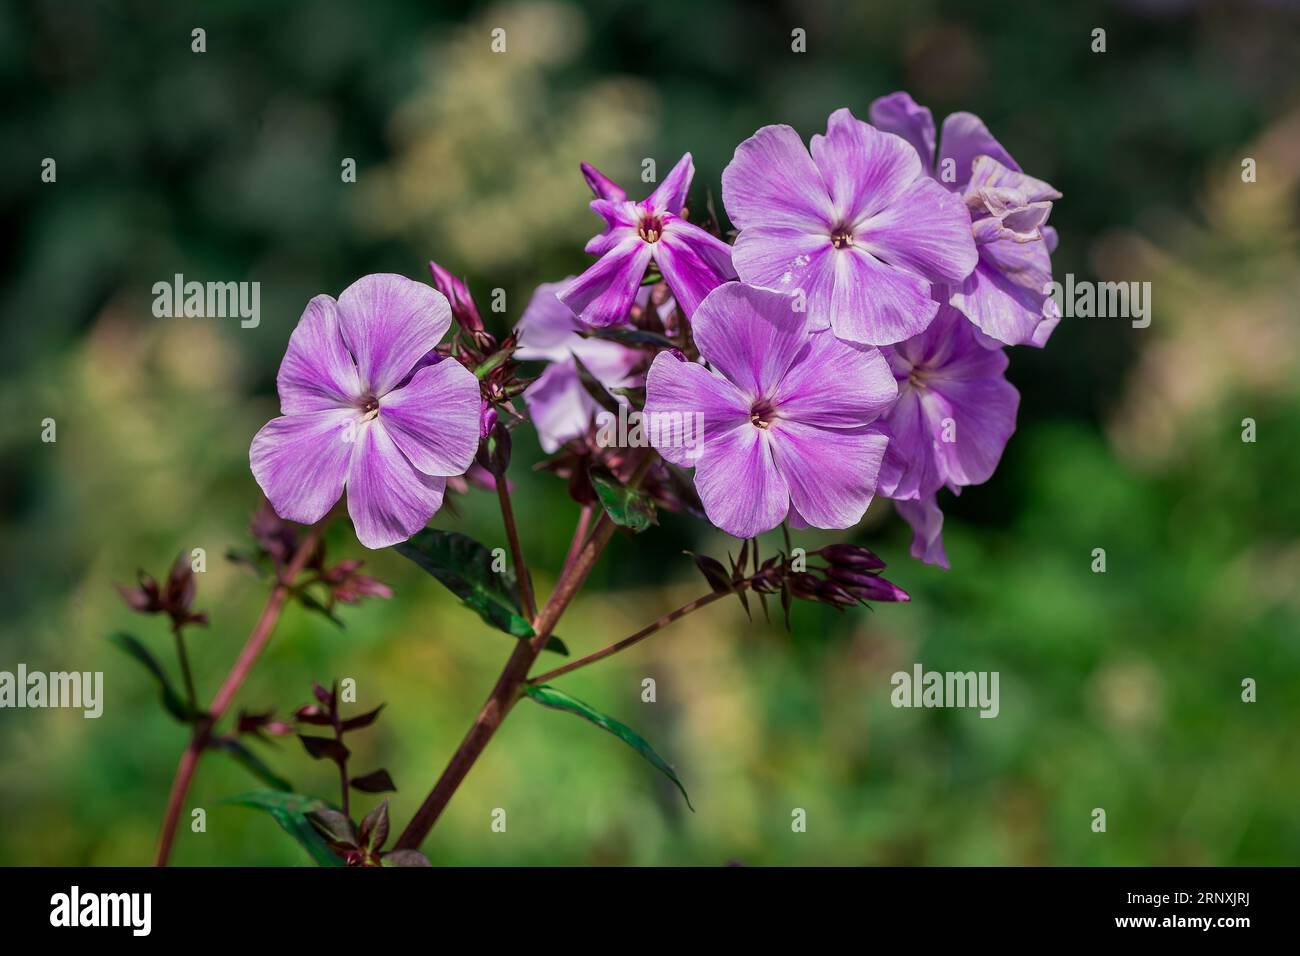 Natural background in summer garden with flowers Stock Photo